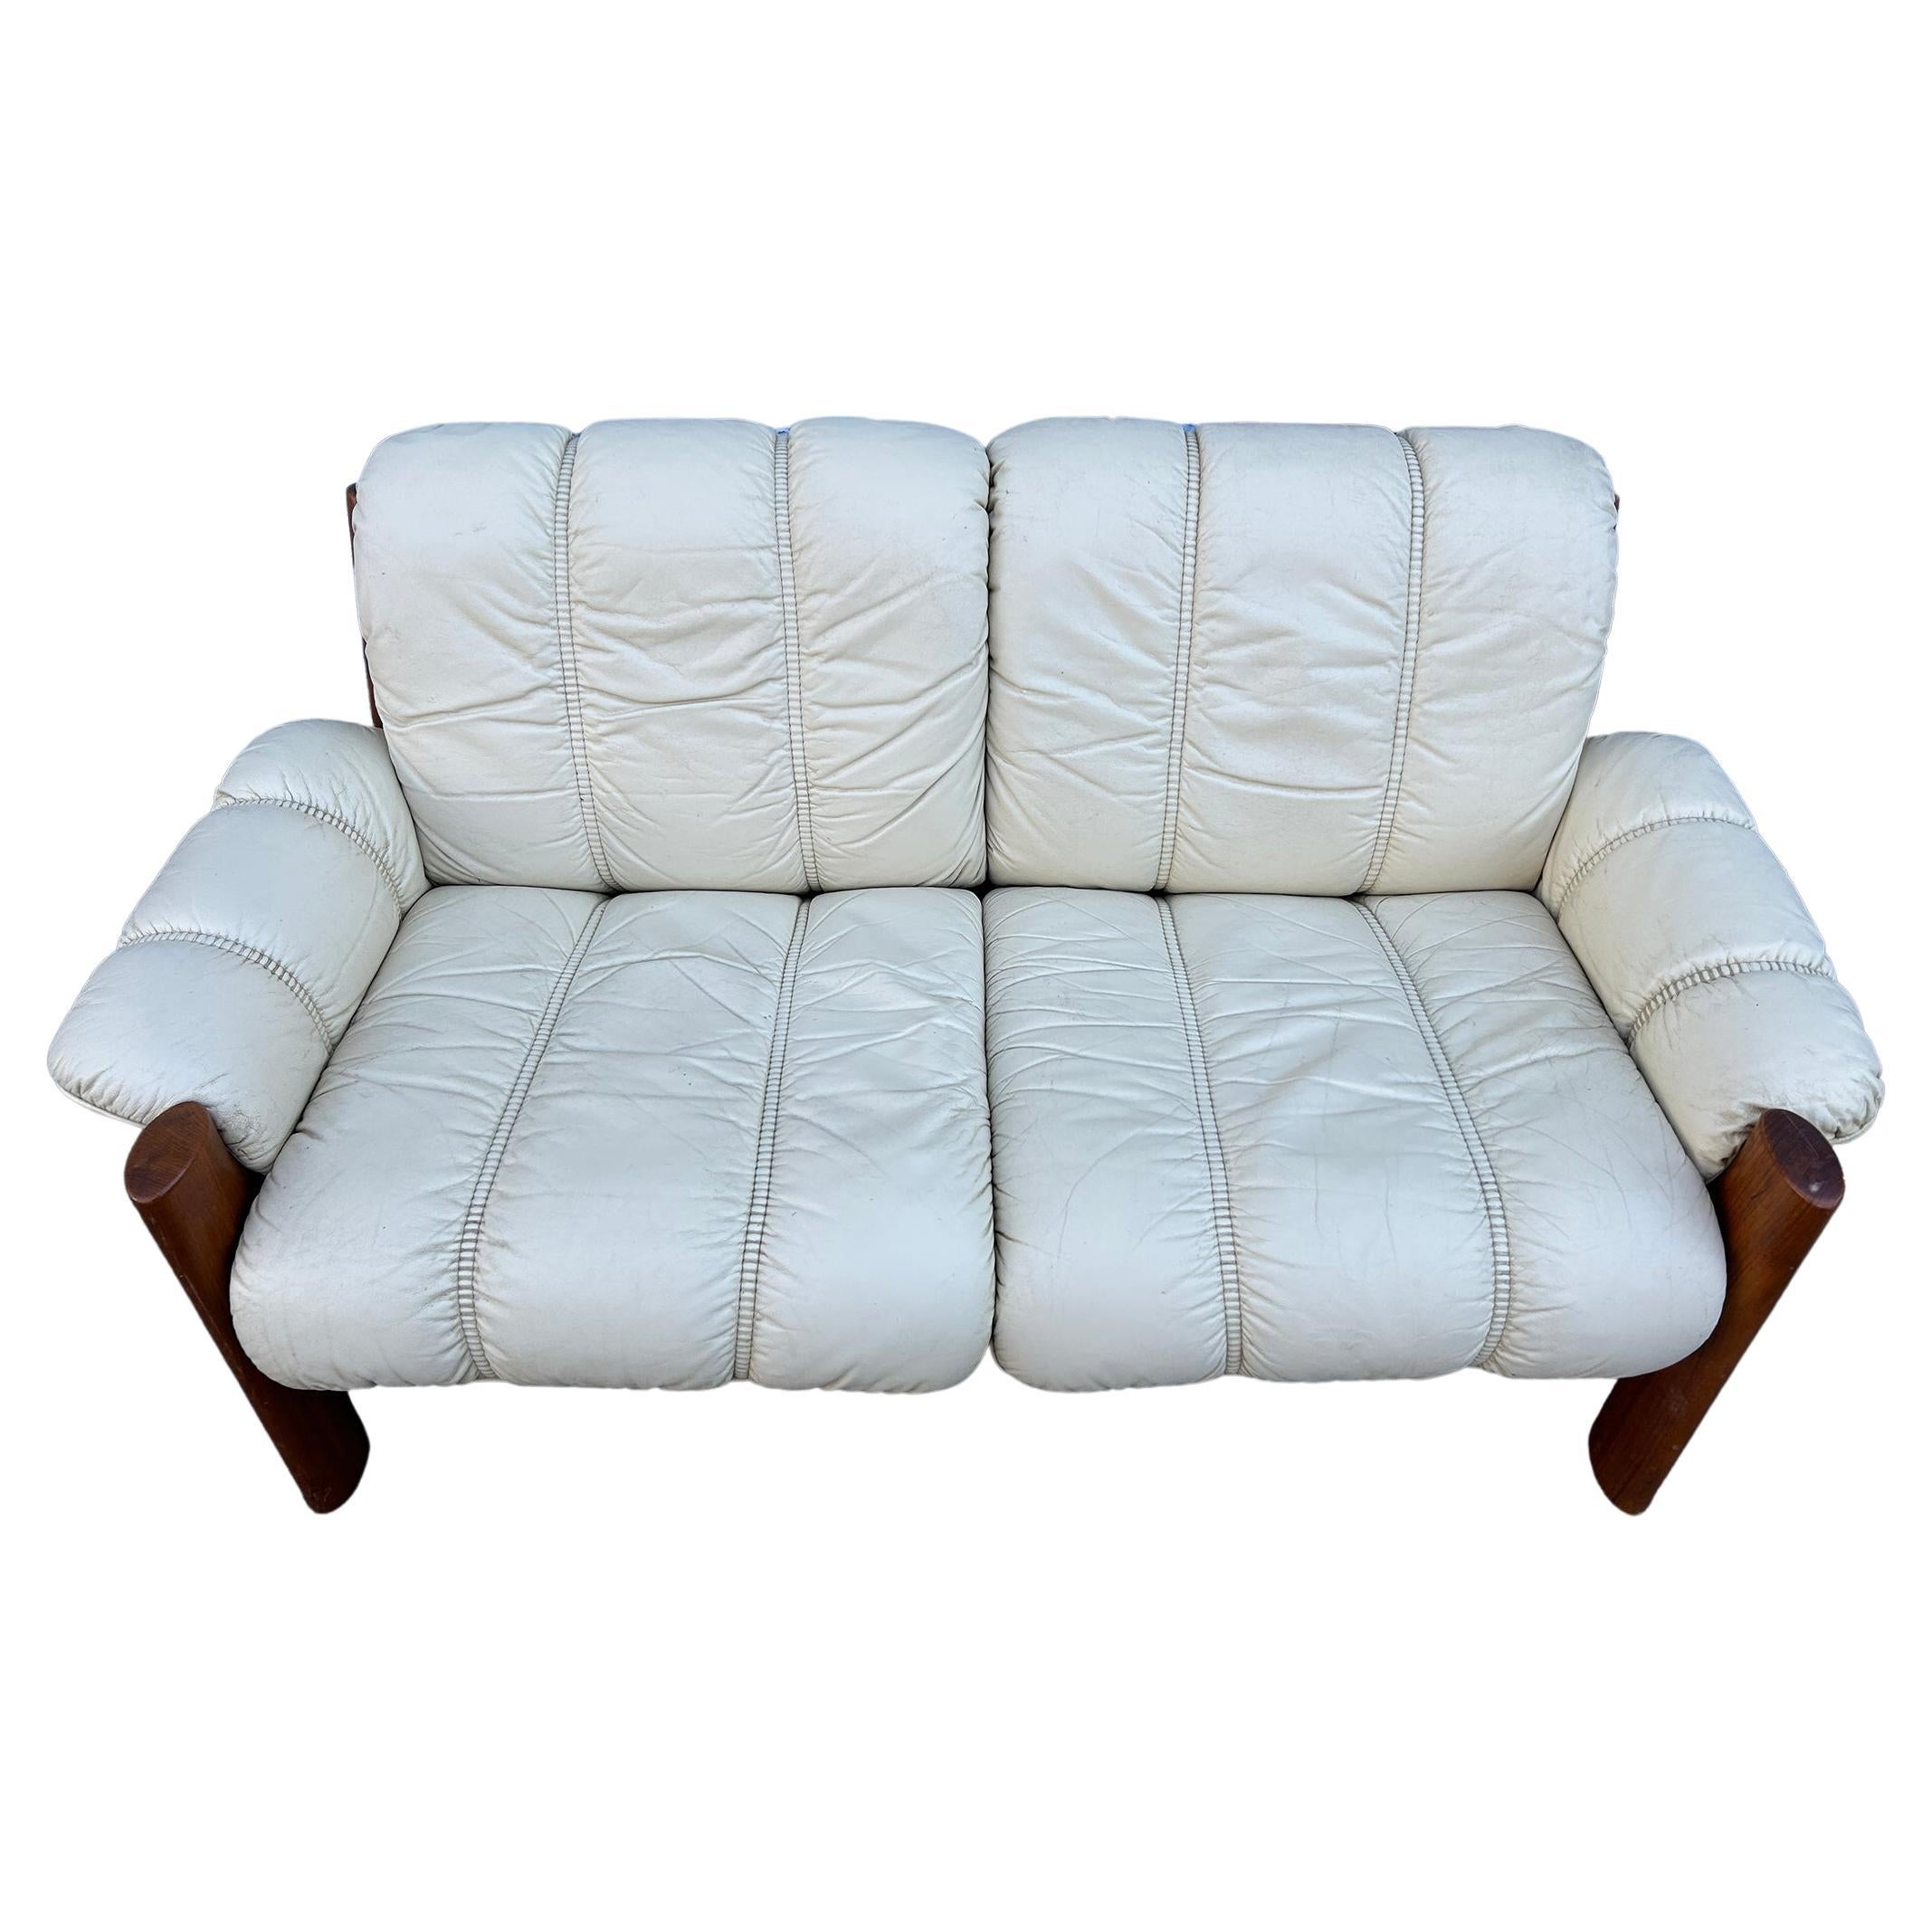 Mid-century Norwegian Modern Ekornes leather teak 2 seater sofa. Superb light buttermilk yellow/beige leather with solid teak wood frames. Beautiful condition and very comfortable. Great Norwegian Design. Good Vintage condition shows normal wear -